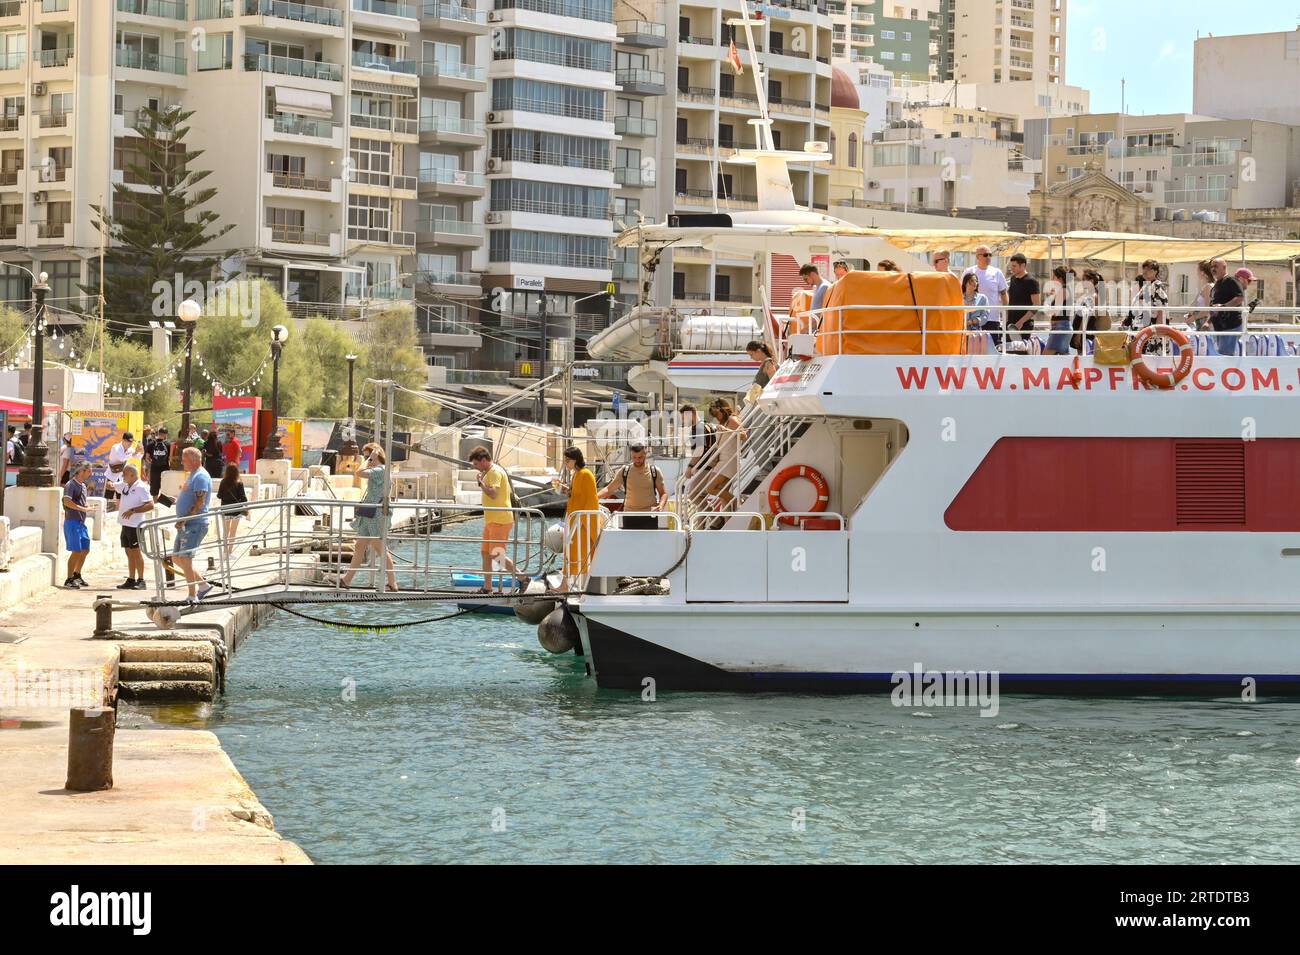 Sliema, Malta - 6 August 2023: Passengers getting off a small ferry in Sliema after arriving from the island's capital, Valletta. Stock Photo